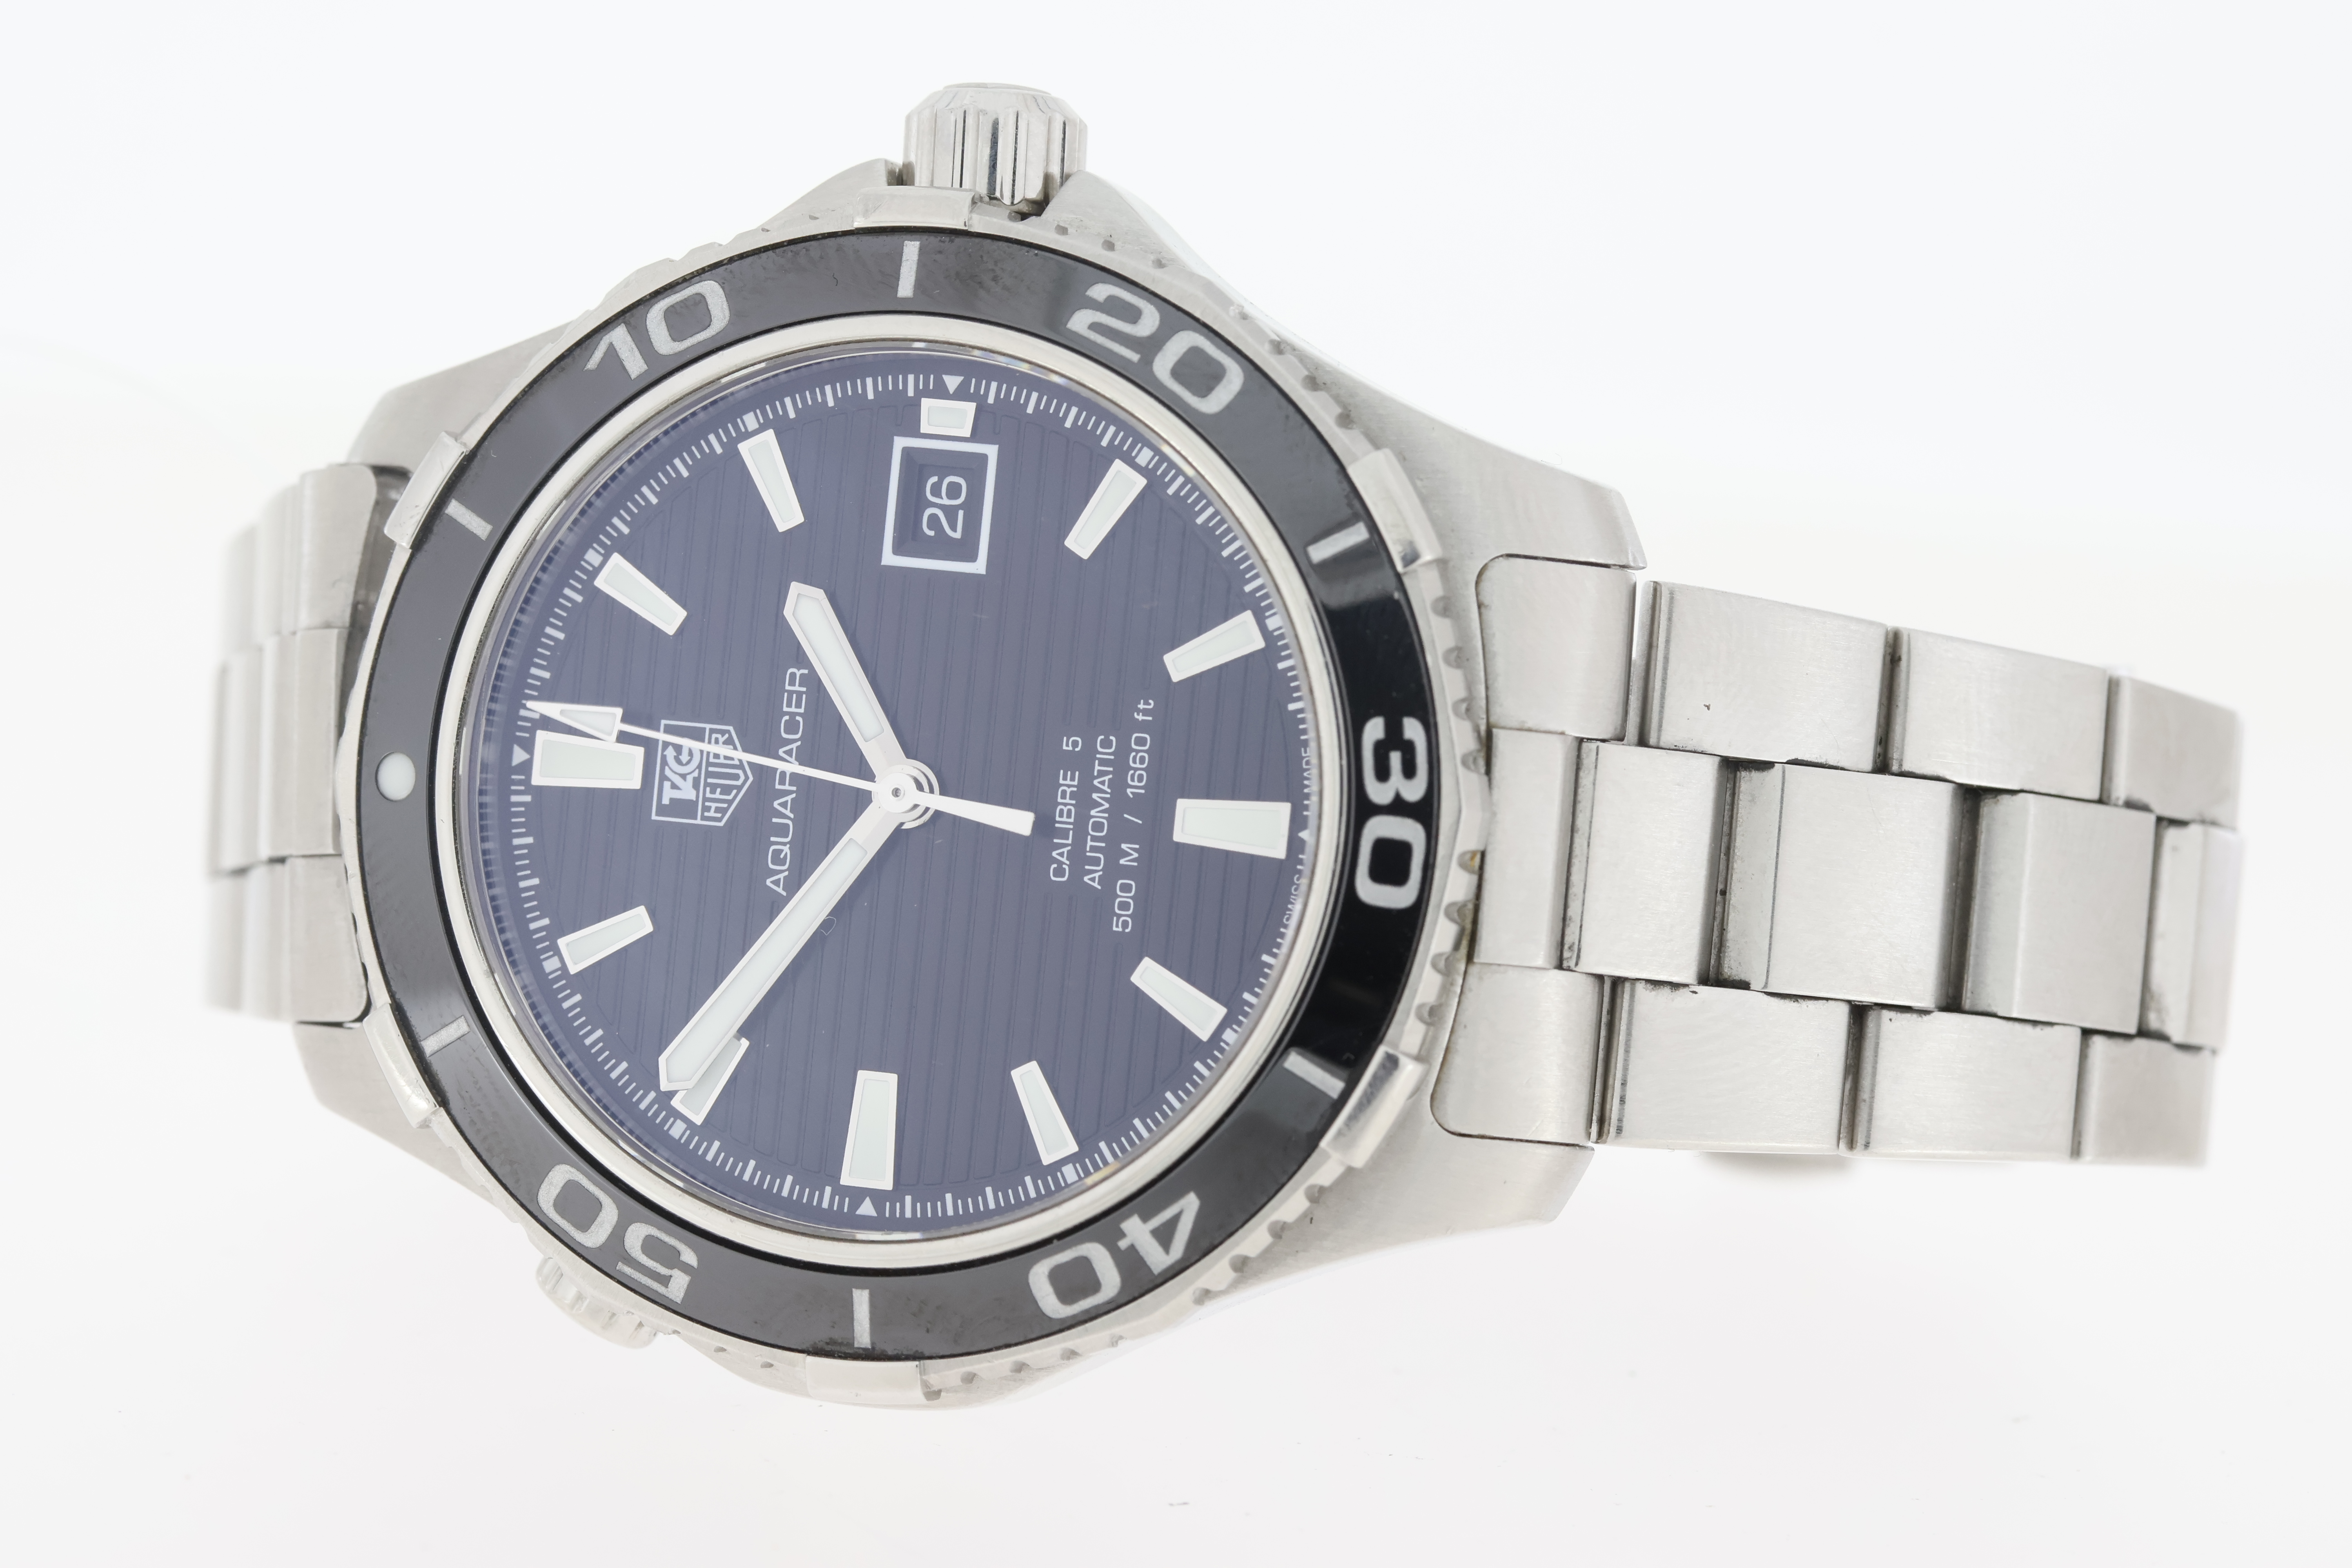 Tag Heuer Aquaracer Date Automatic - Image 3 of 4